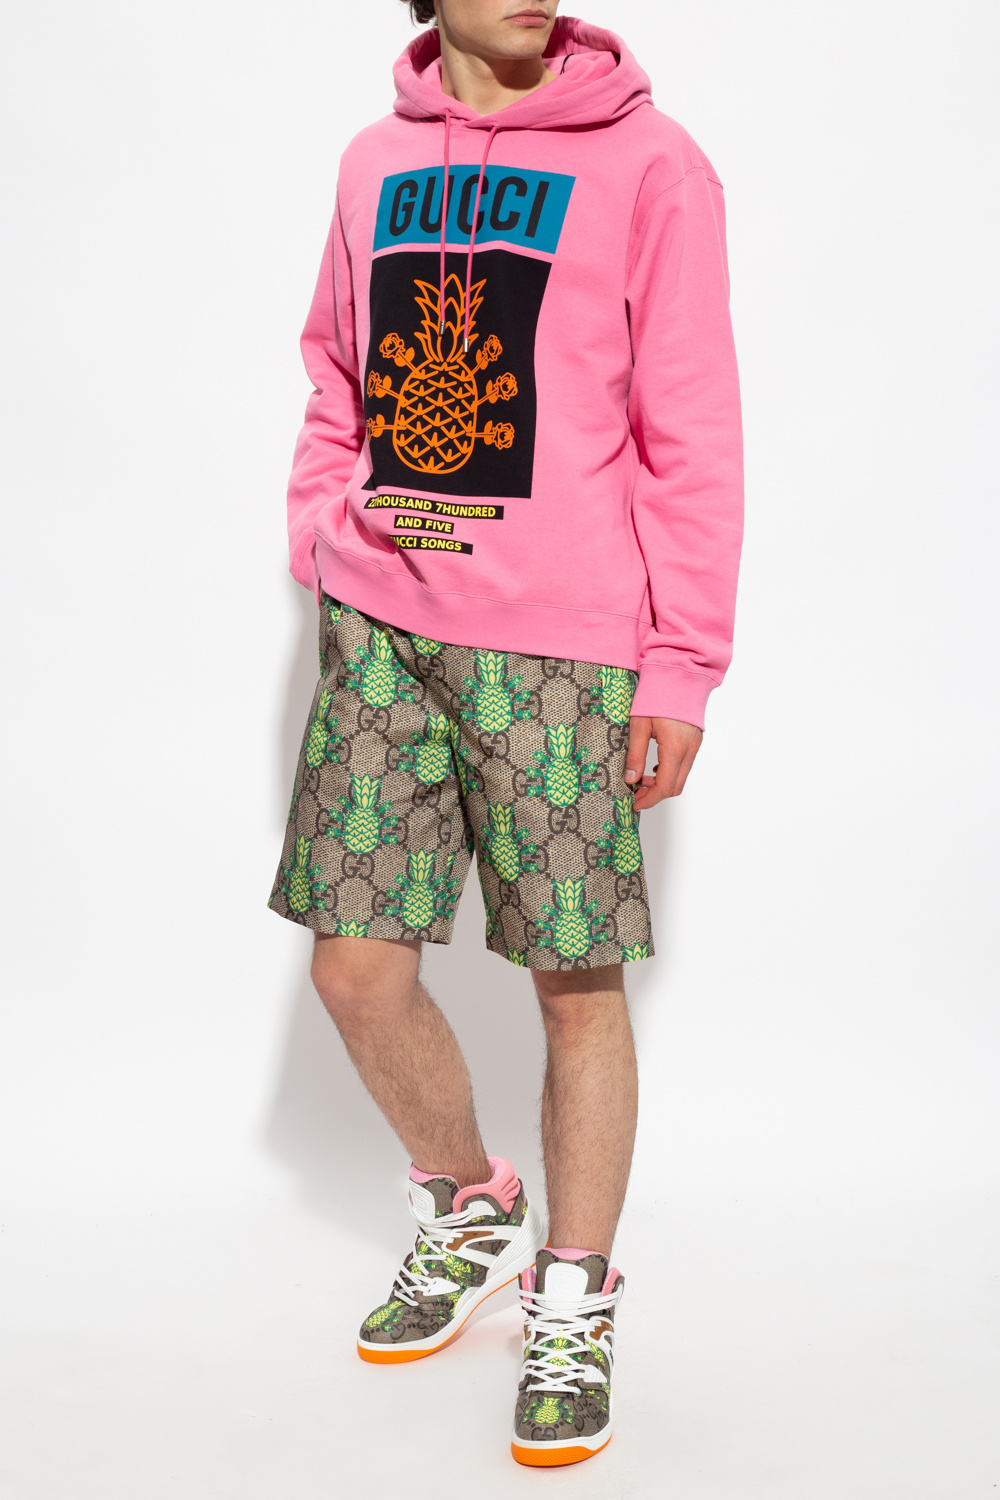 Gucci The ‘Gucci Pineapple’ collection hoodie